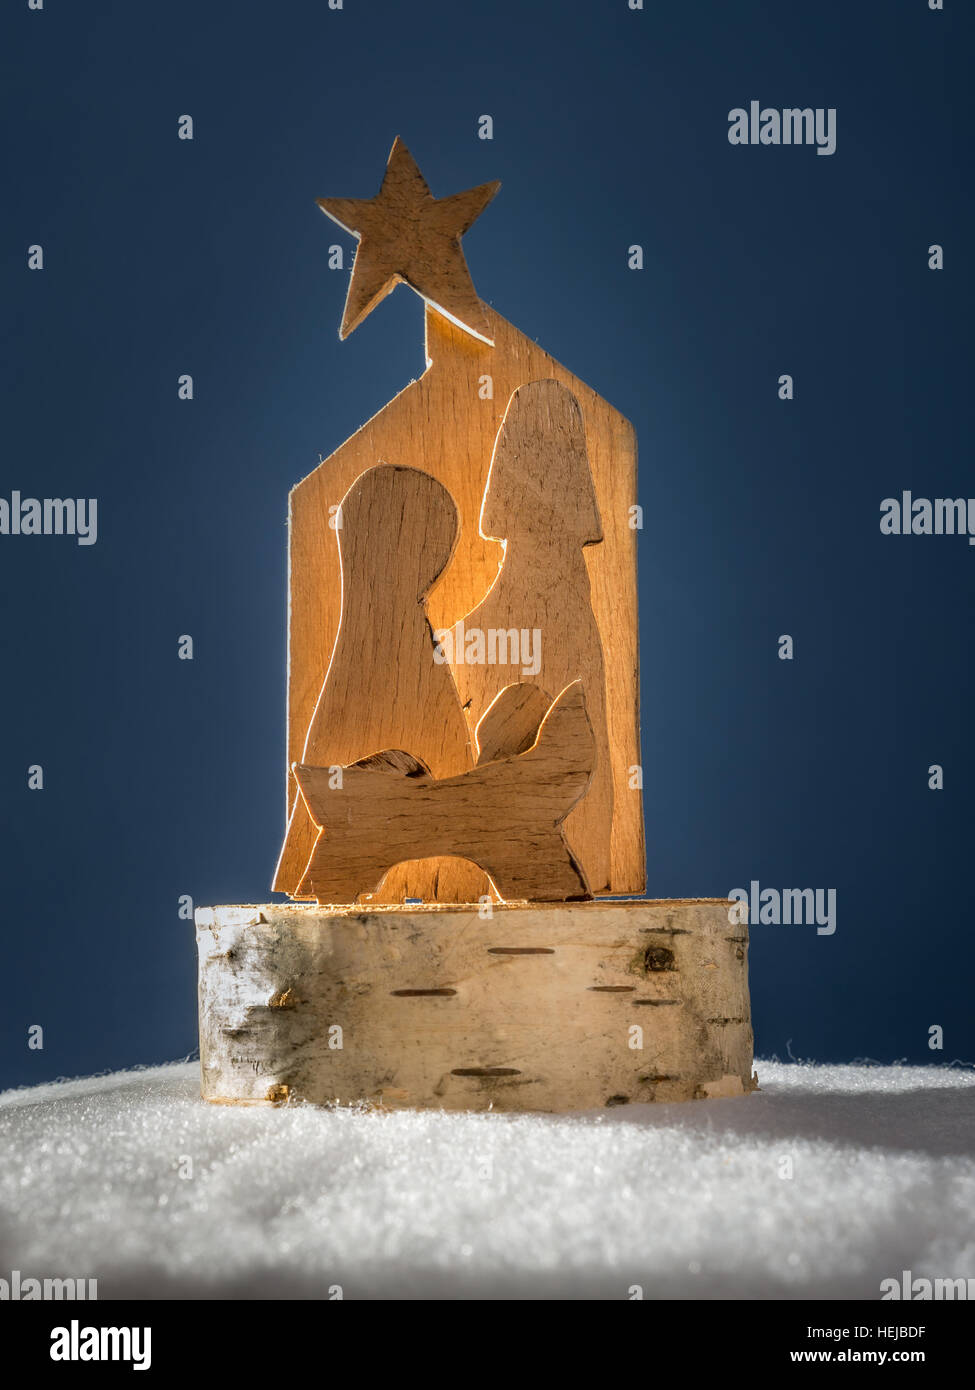 Christmas crib cut out from plywood over dark blue background Stock Photo